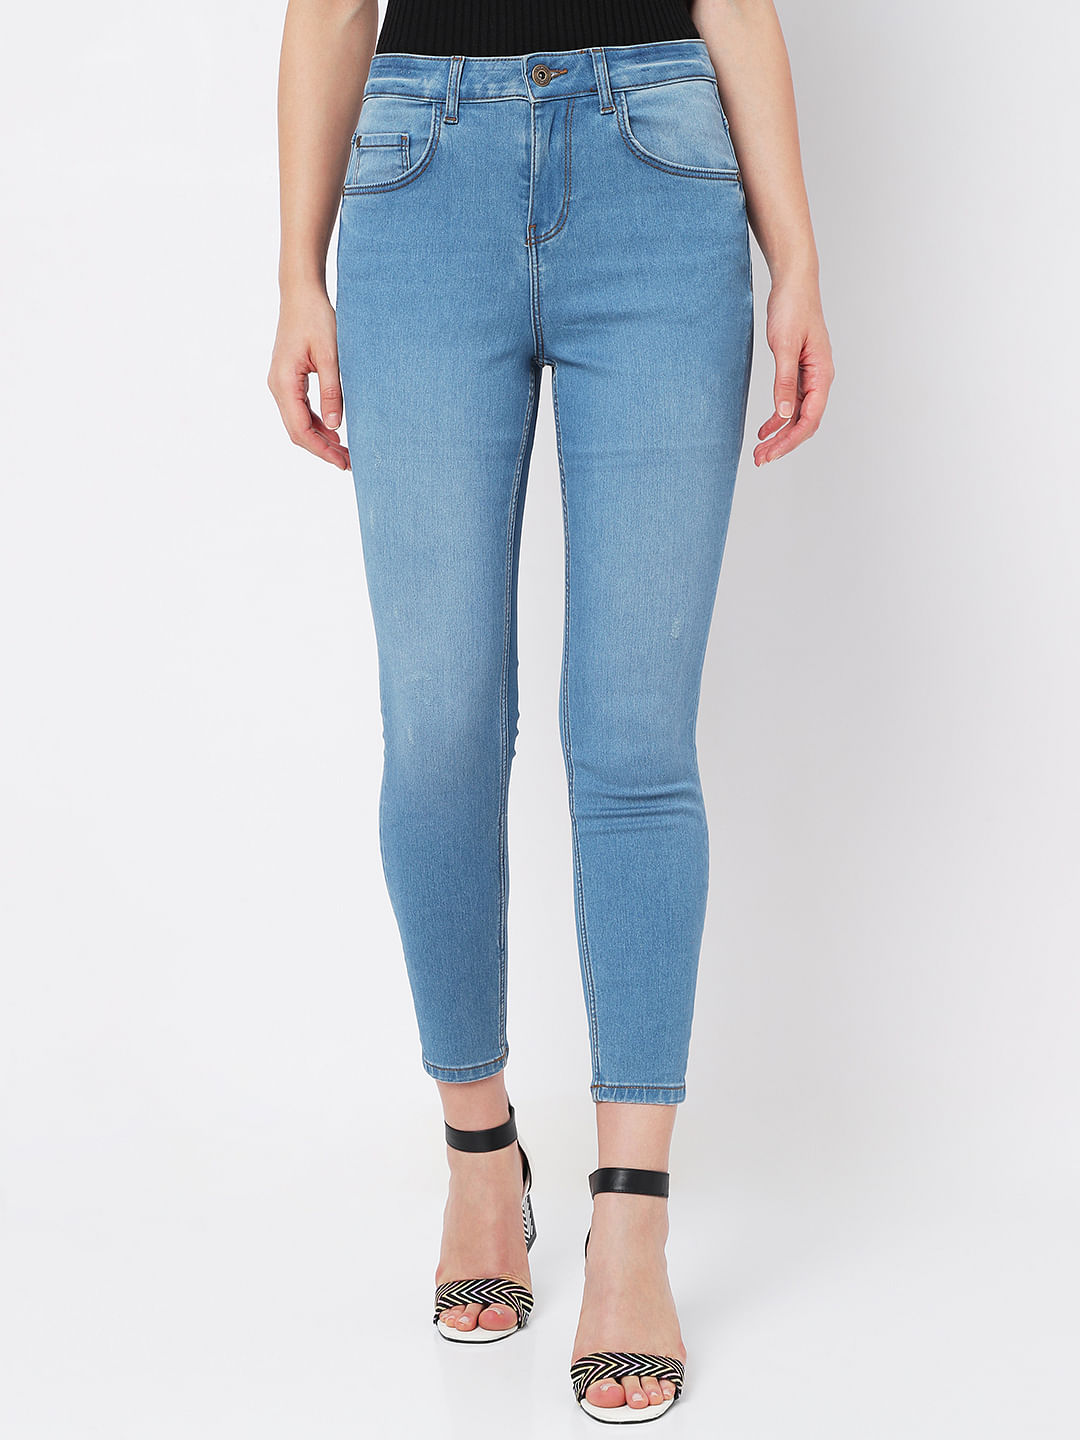 Plus Size WAX Distressed Push Up Skinny Jeans - Light Wash